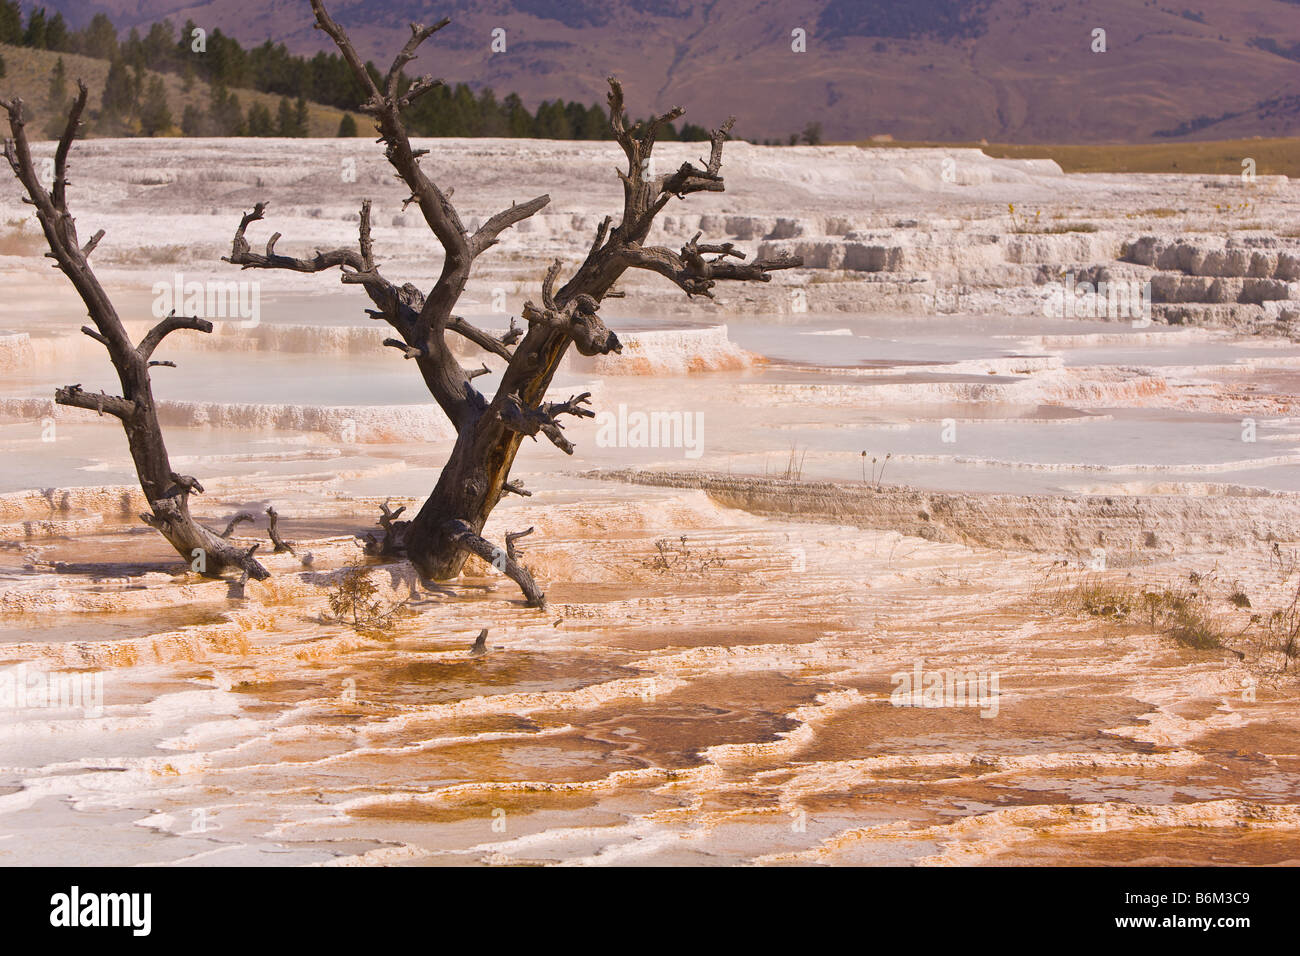 YELLOWSTONE NATIONAL PARK WYOMING USA Dead trees at the Main Terraces area Mammoth Hot Springs Stock Photo